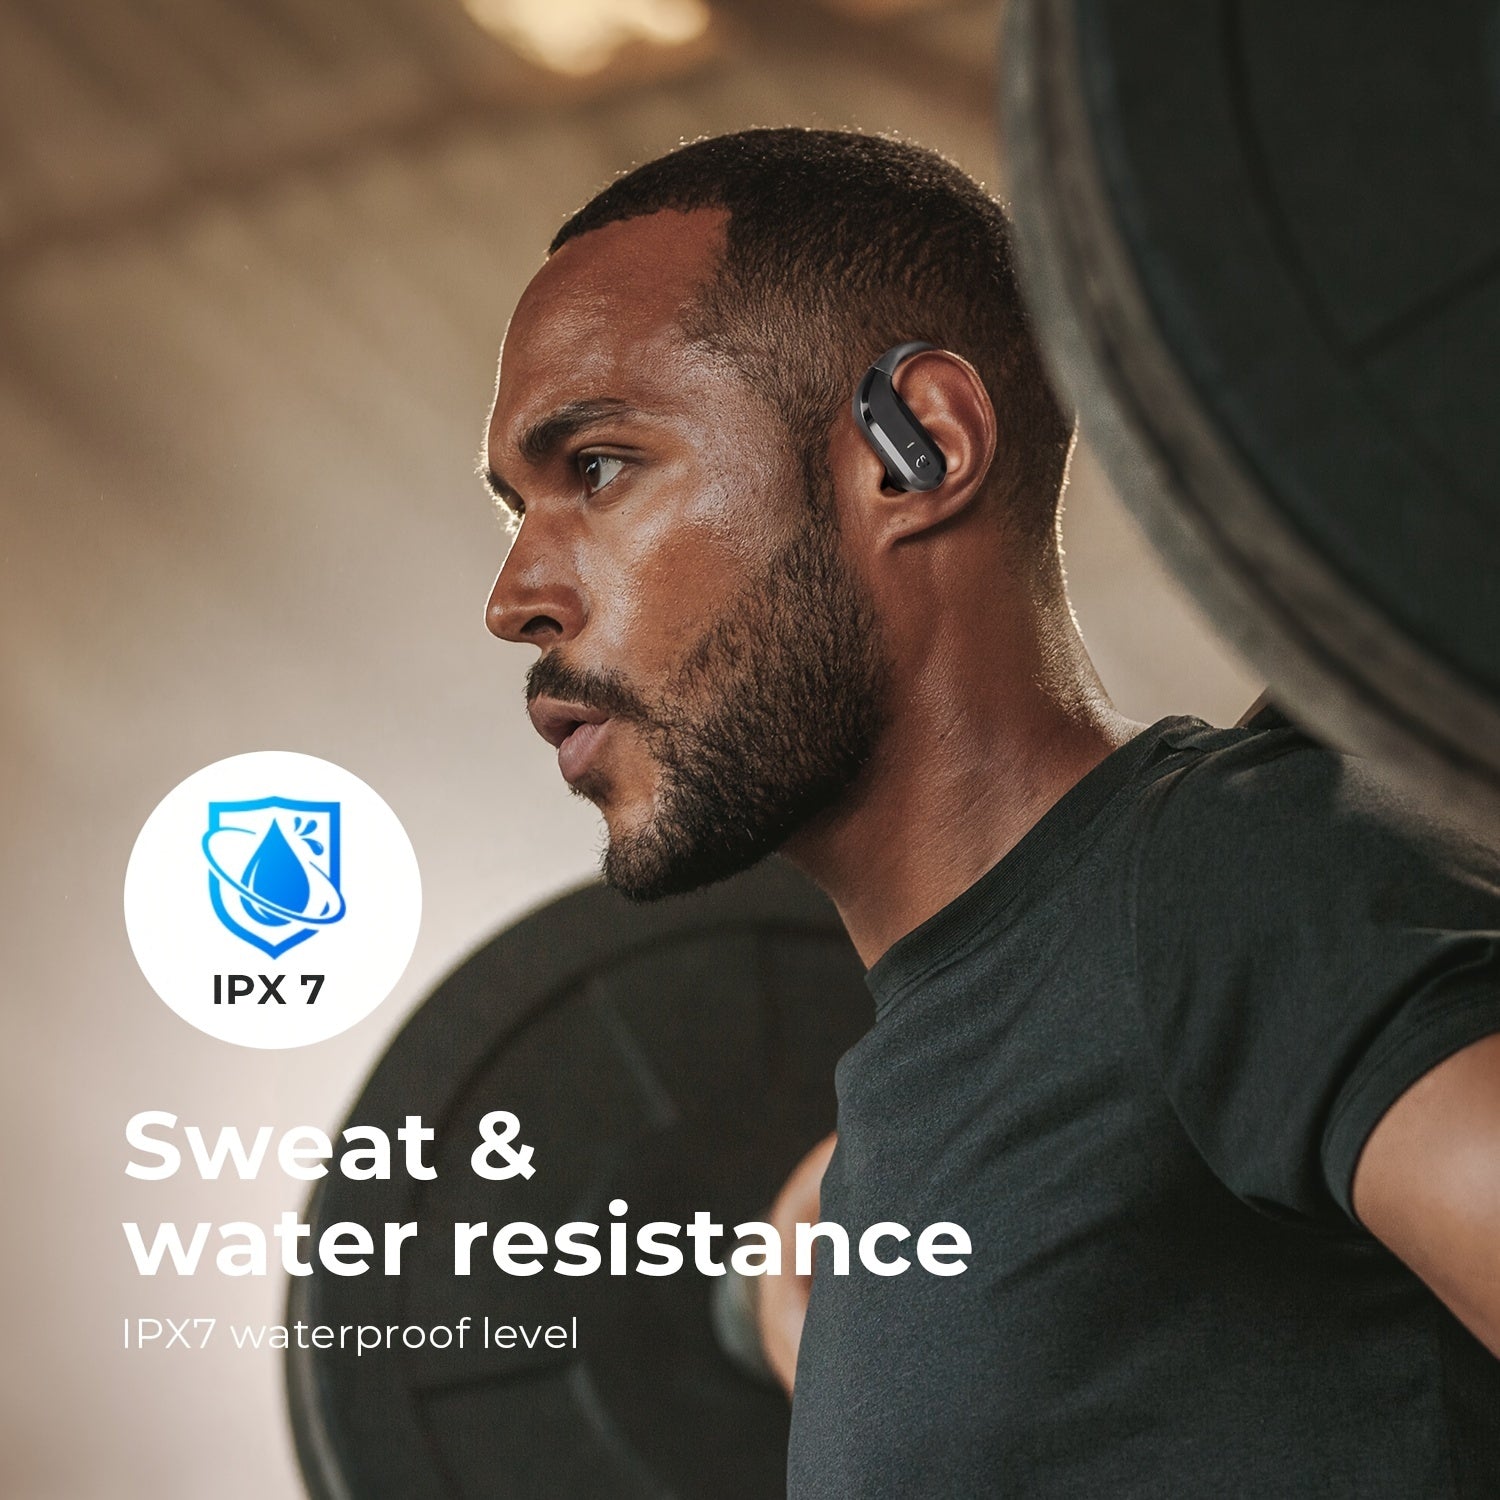 Soundpeats S5 Wireless Earbuds: BT 5.0 Headphones With Touch Control, IPX7 Waterproof, 12mm Drivers & Mono/Stereo Mode - Perfect For Sports